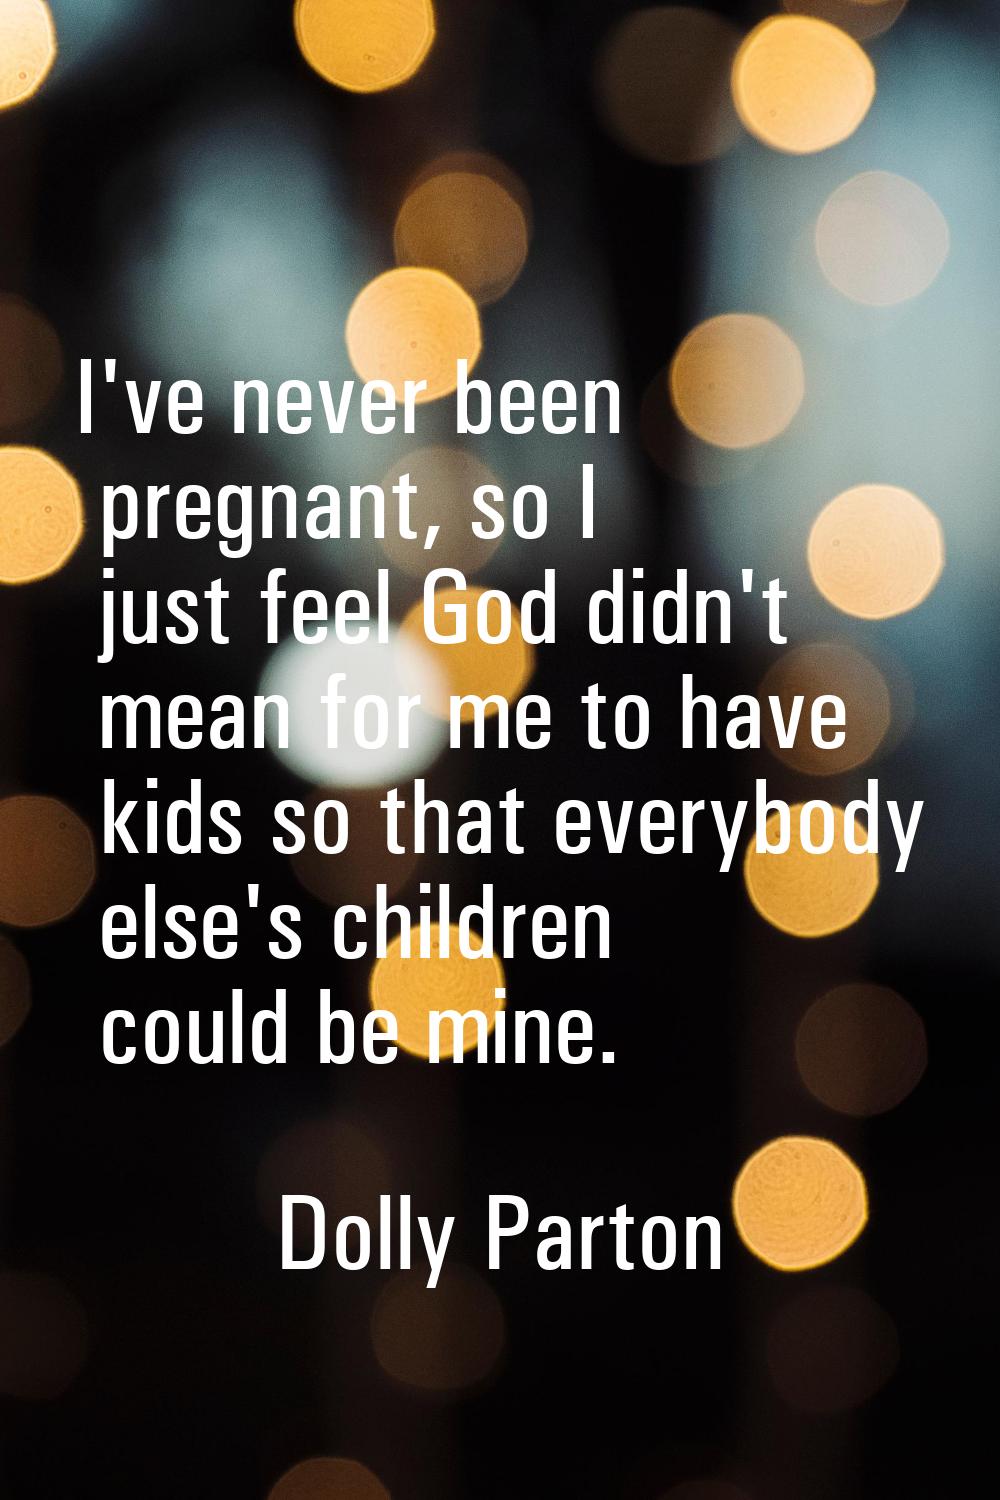 I've never been pregnant, so I just feel God didn't mean for me to have kids so that everybody else